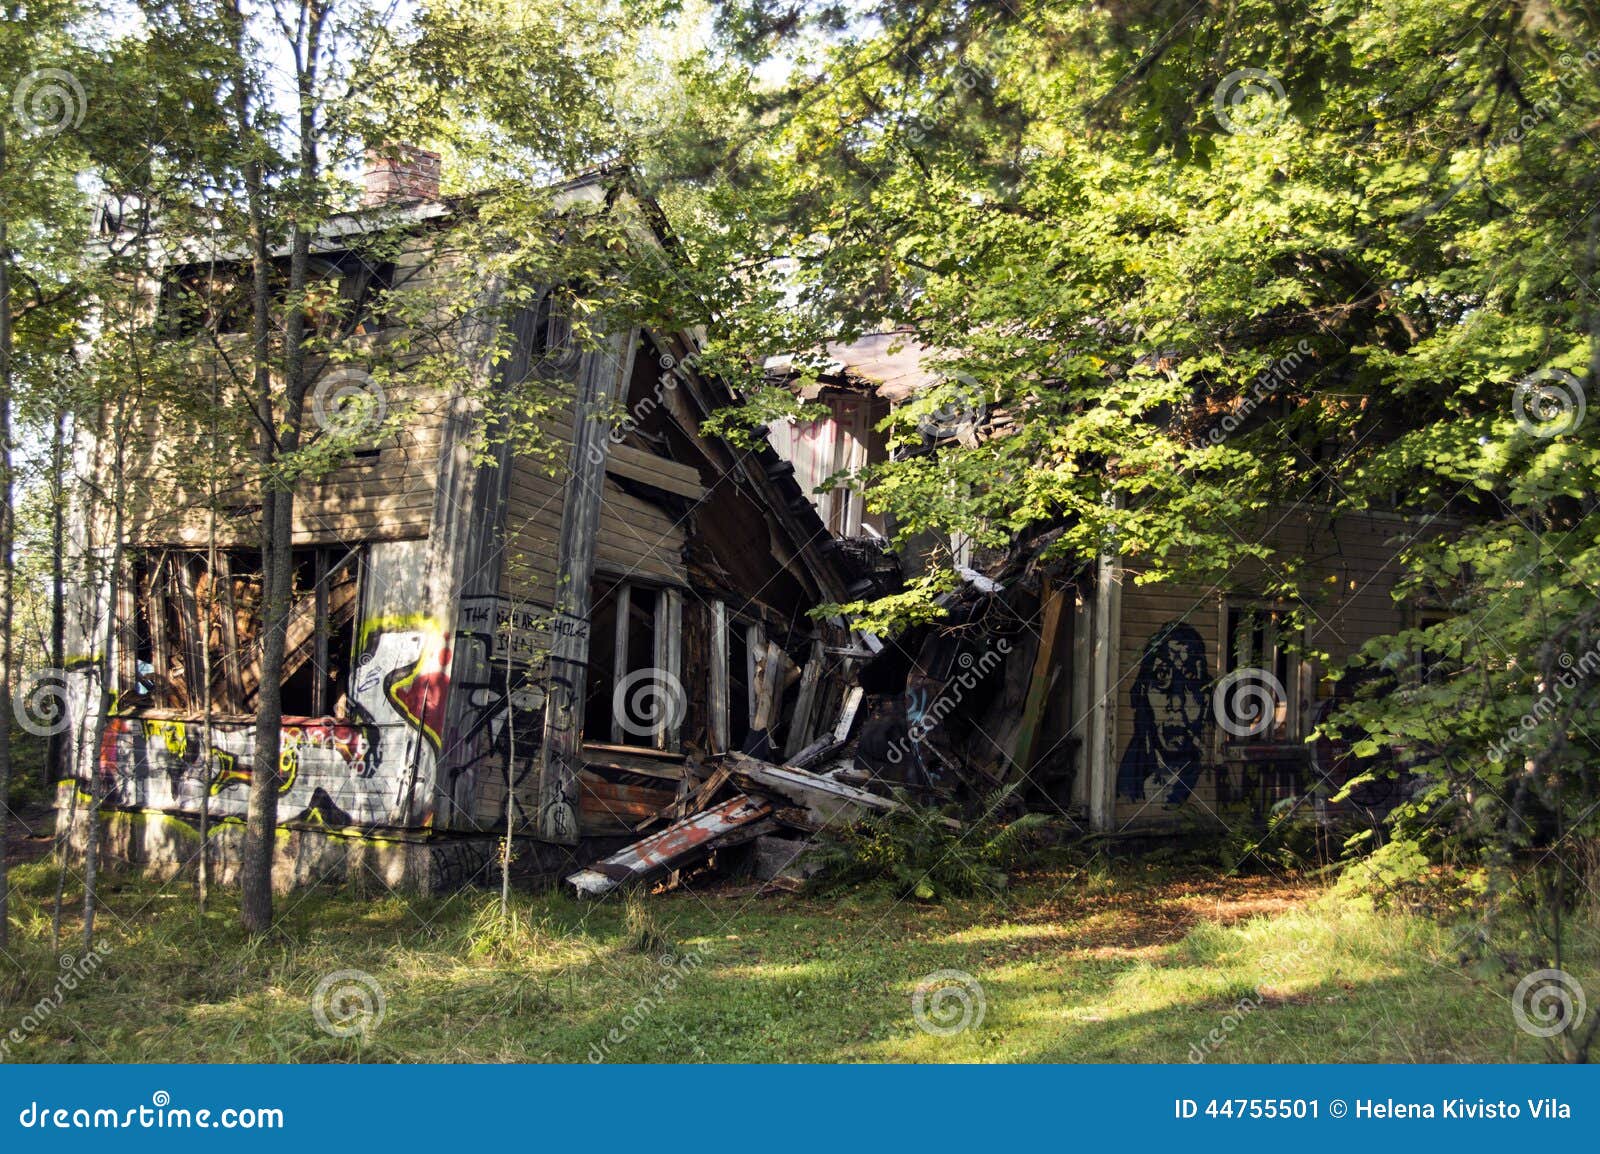 collapsed old wooden house